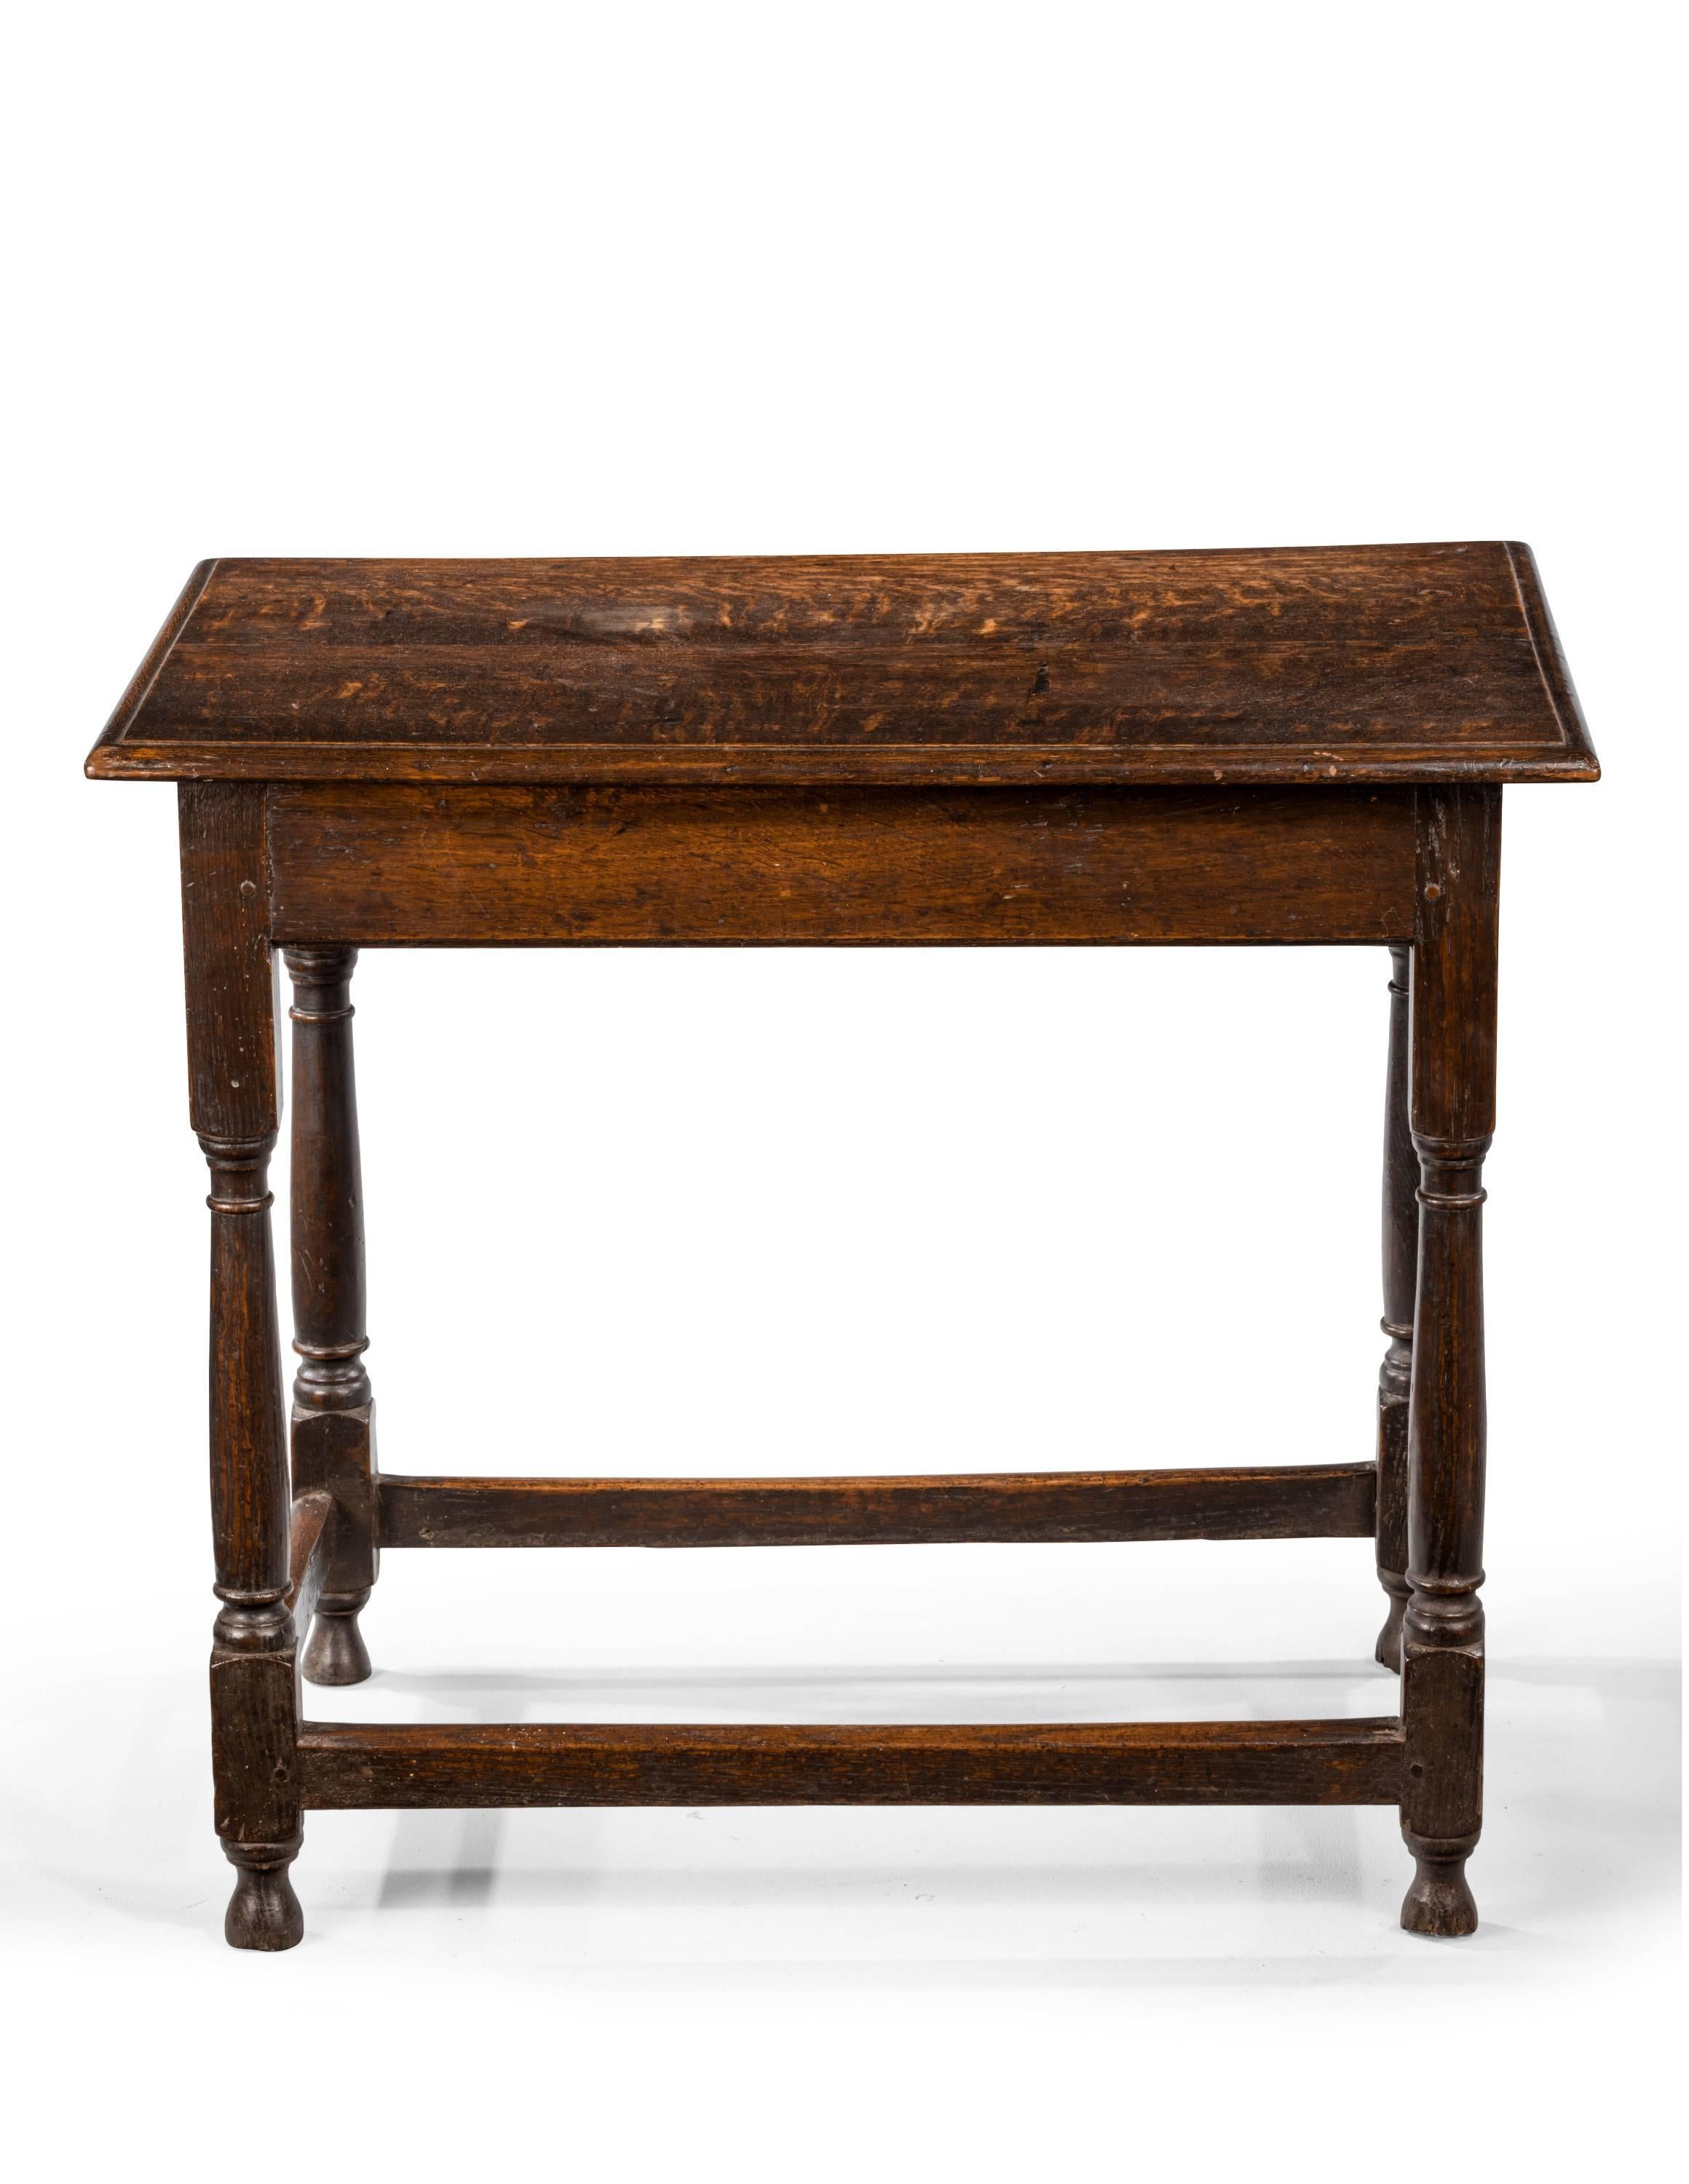 Mid-18th century side table. Rectangular top and a moulded edge. Raised on turned legs.